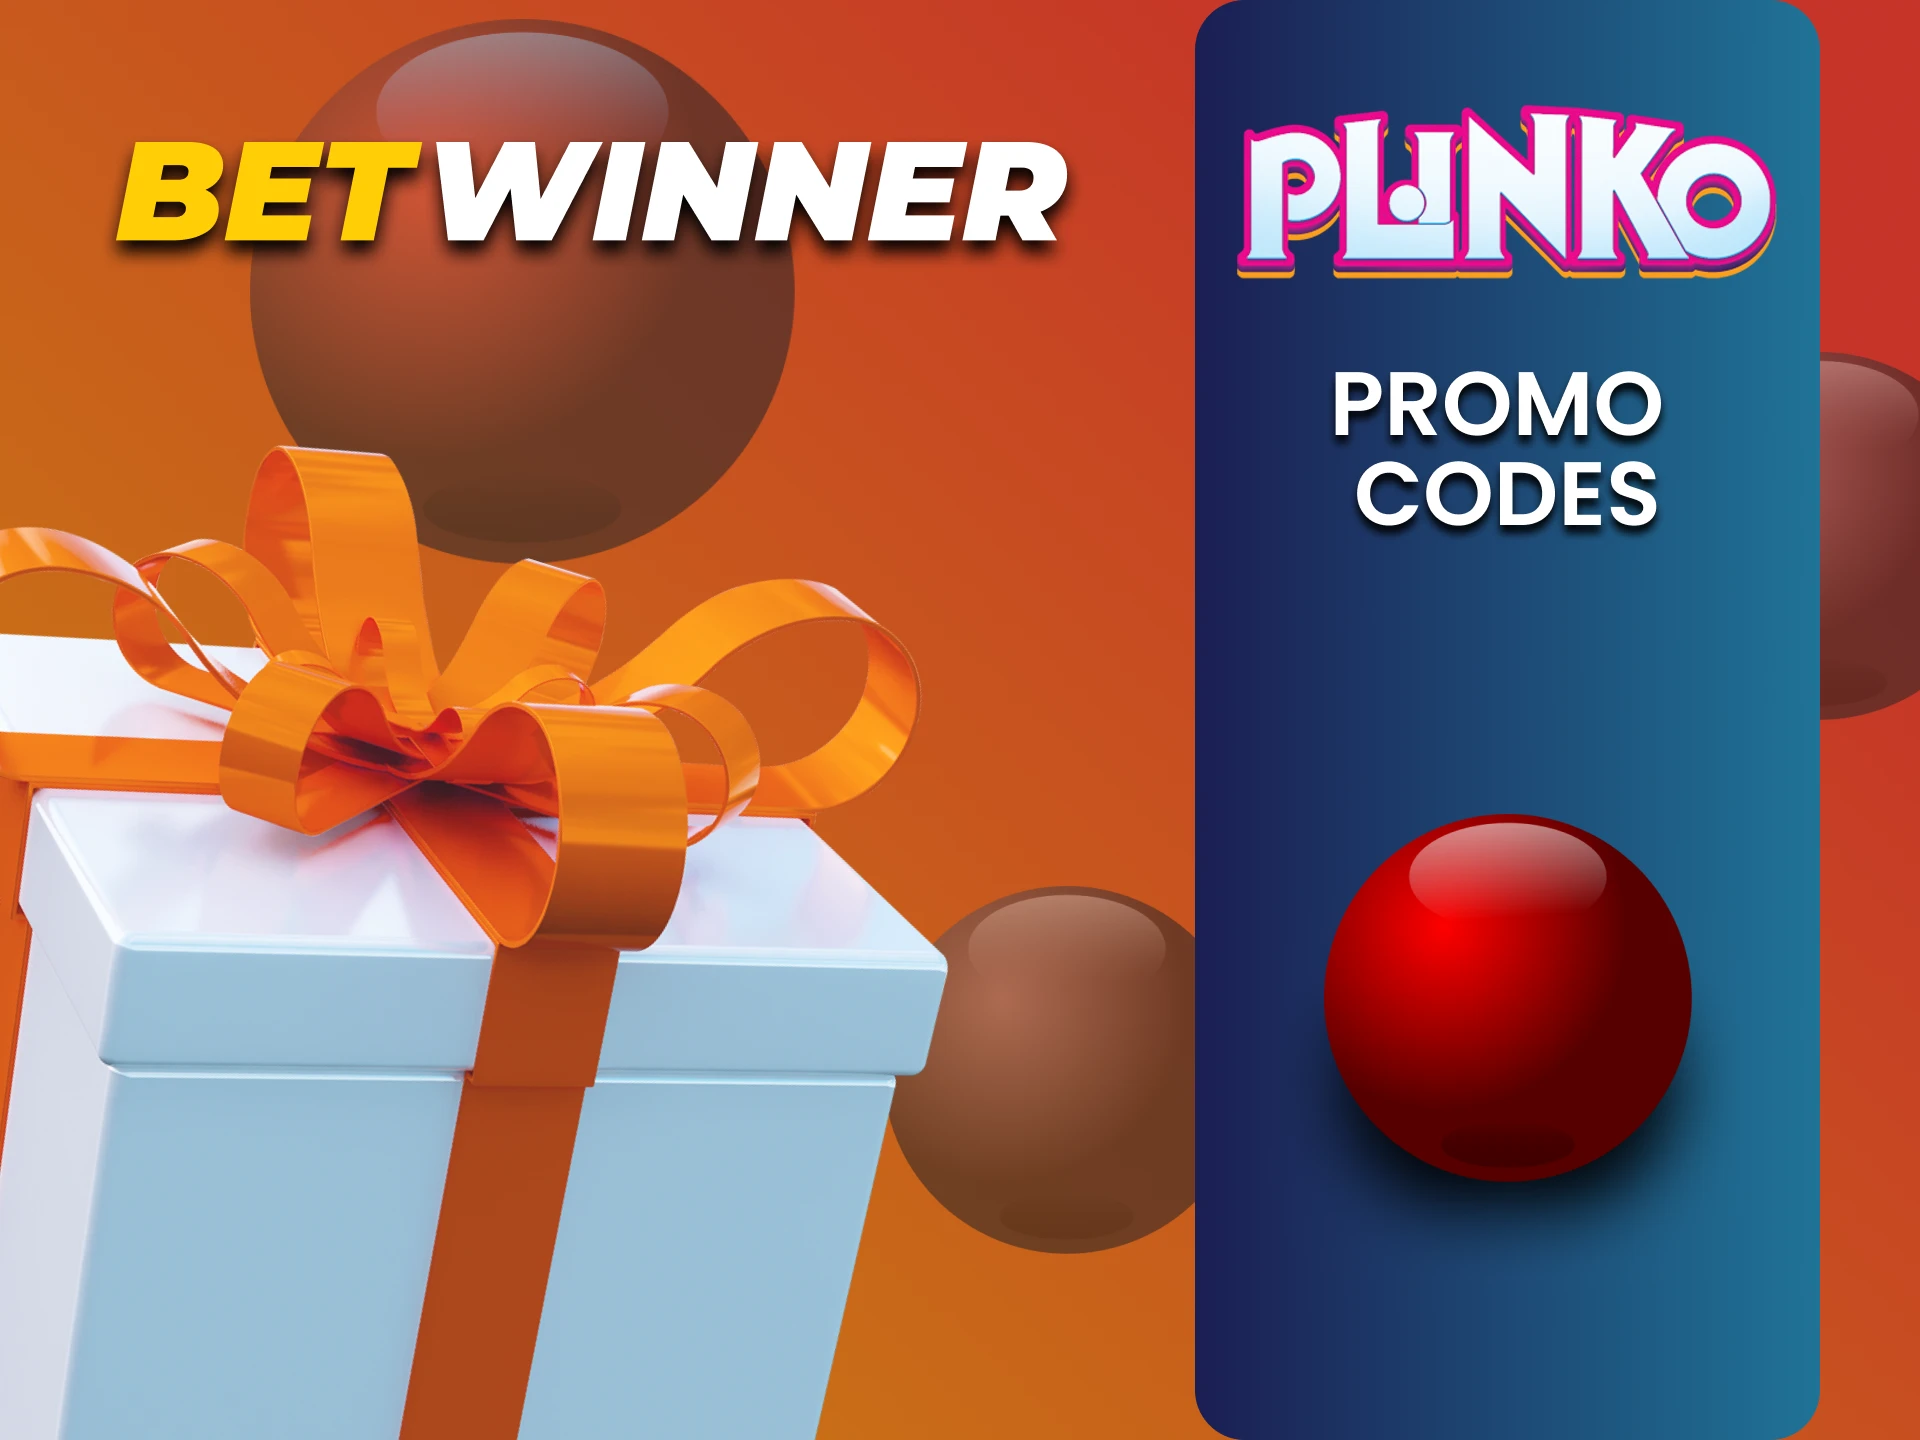 Betwinner gives a bonus for playing Plinko if you use a promo code.